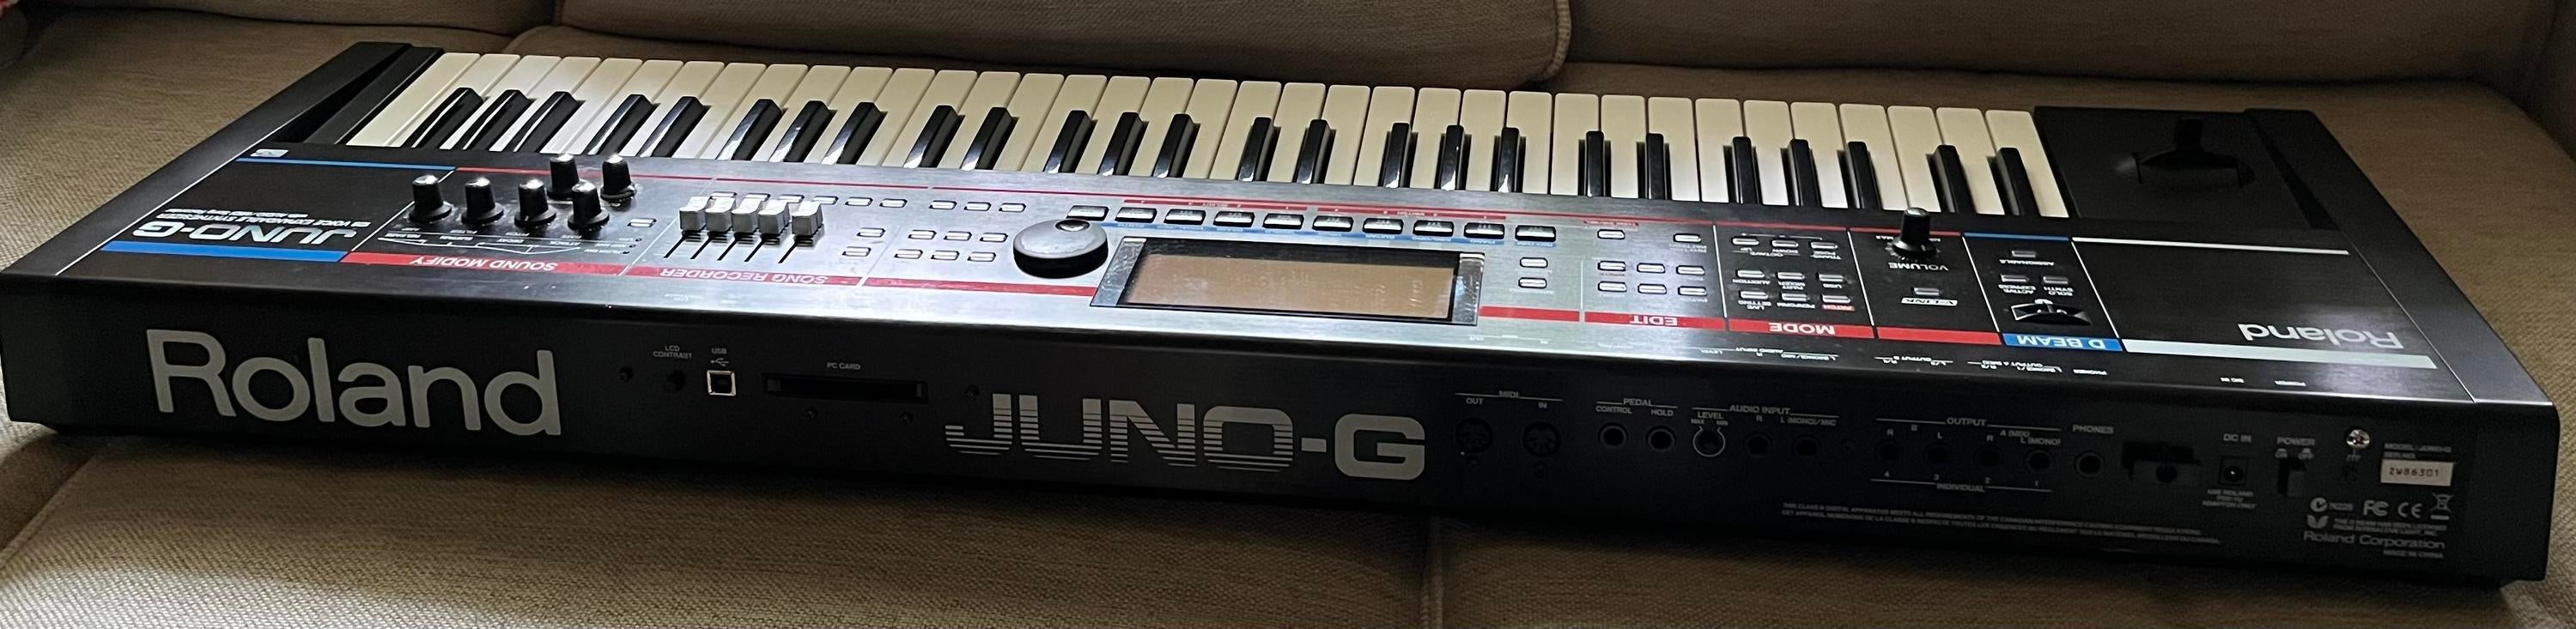 Used Roland Juno-G 61 Key Synth - Sweetwater's Gear Exchange